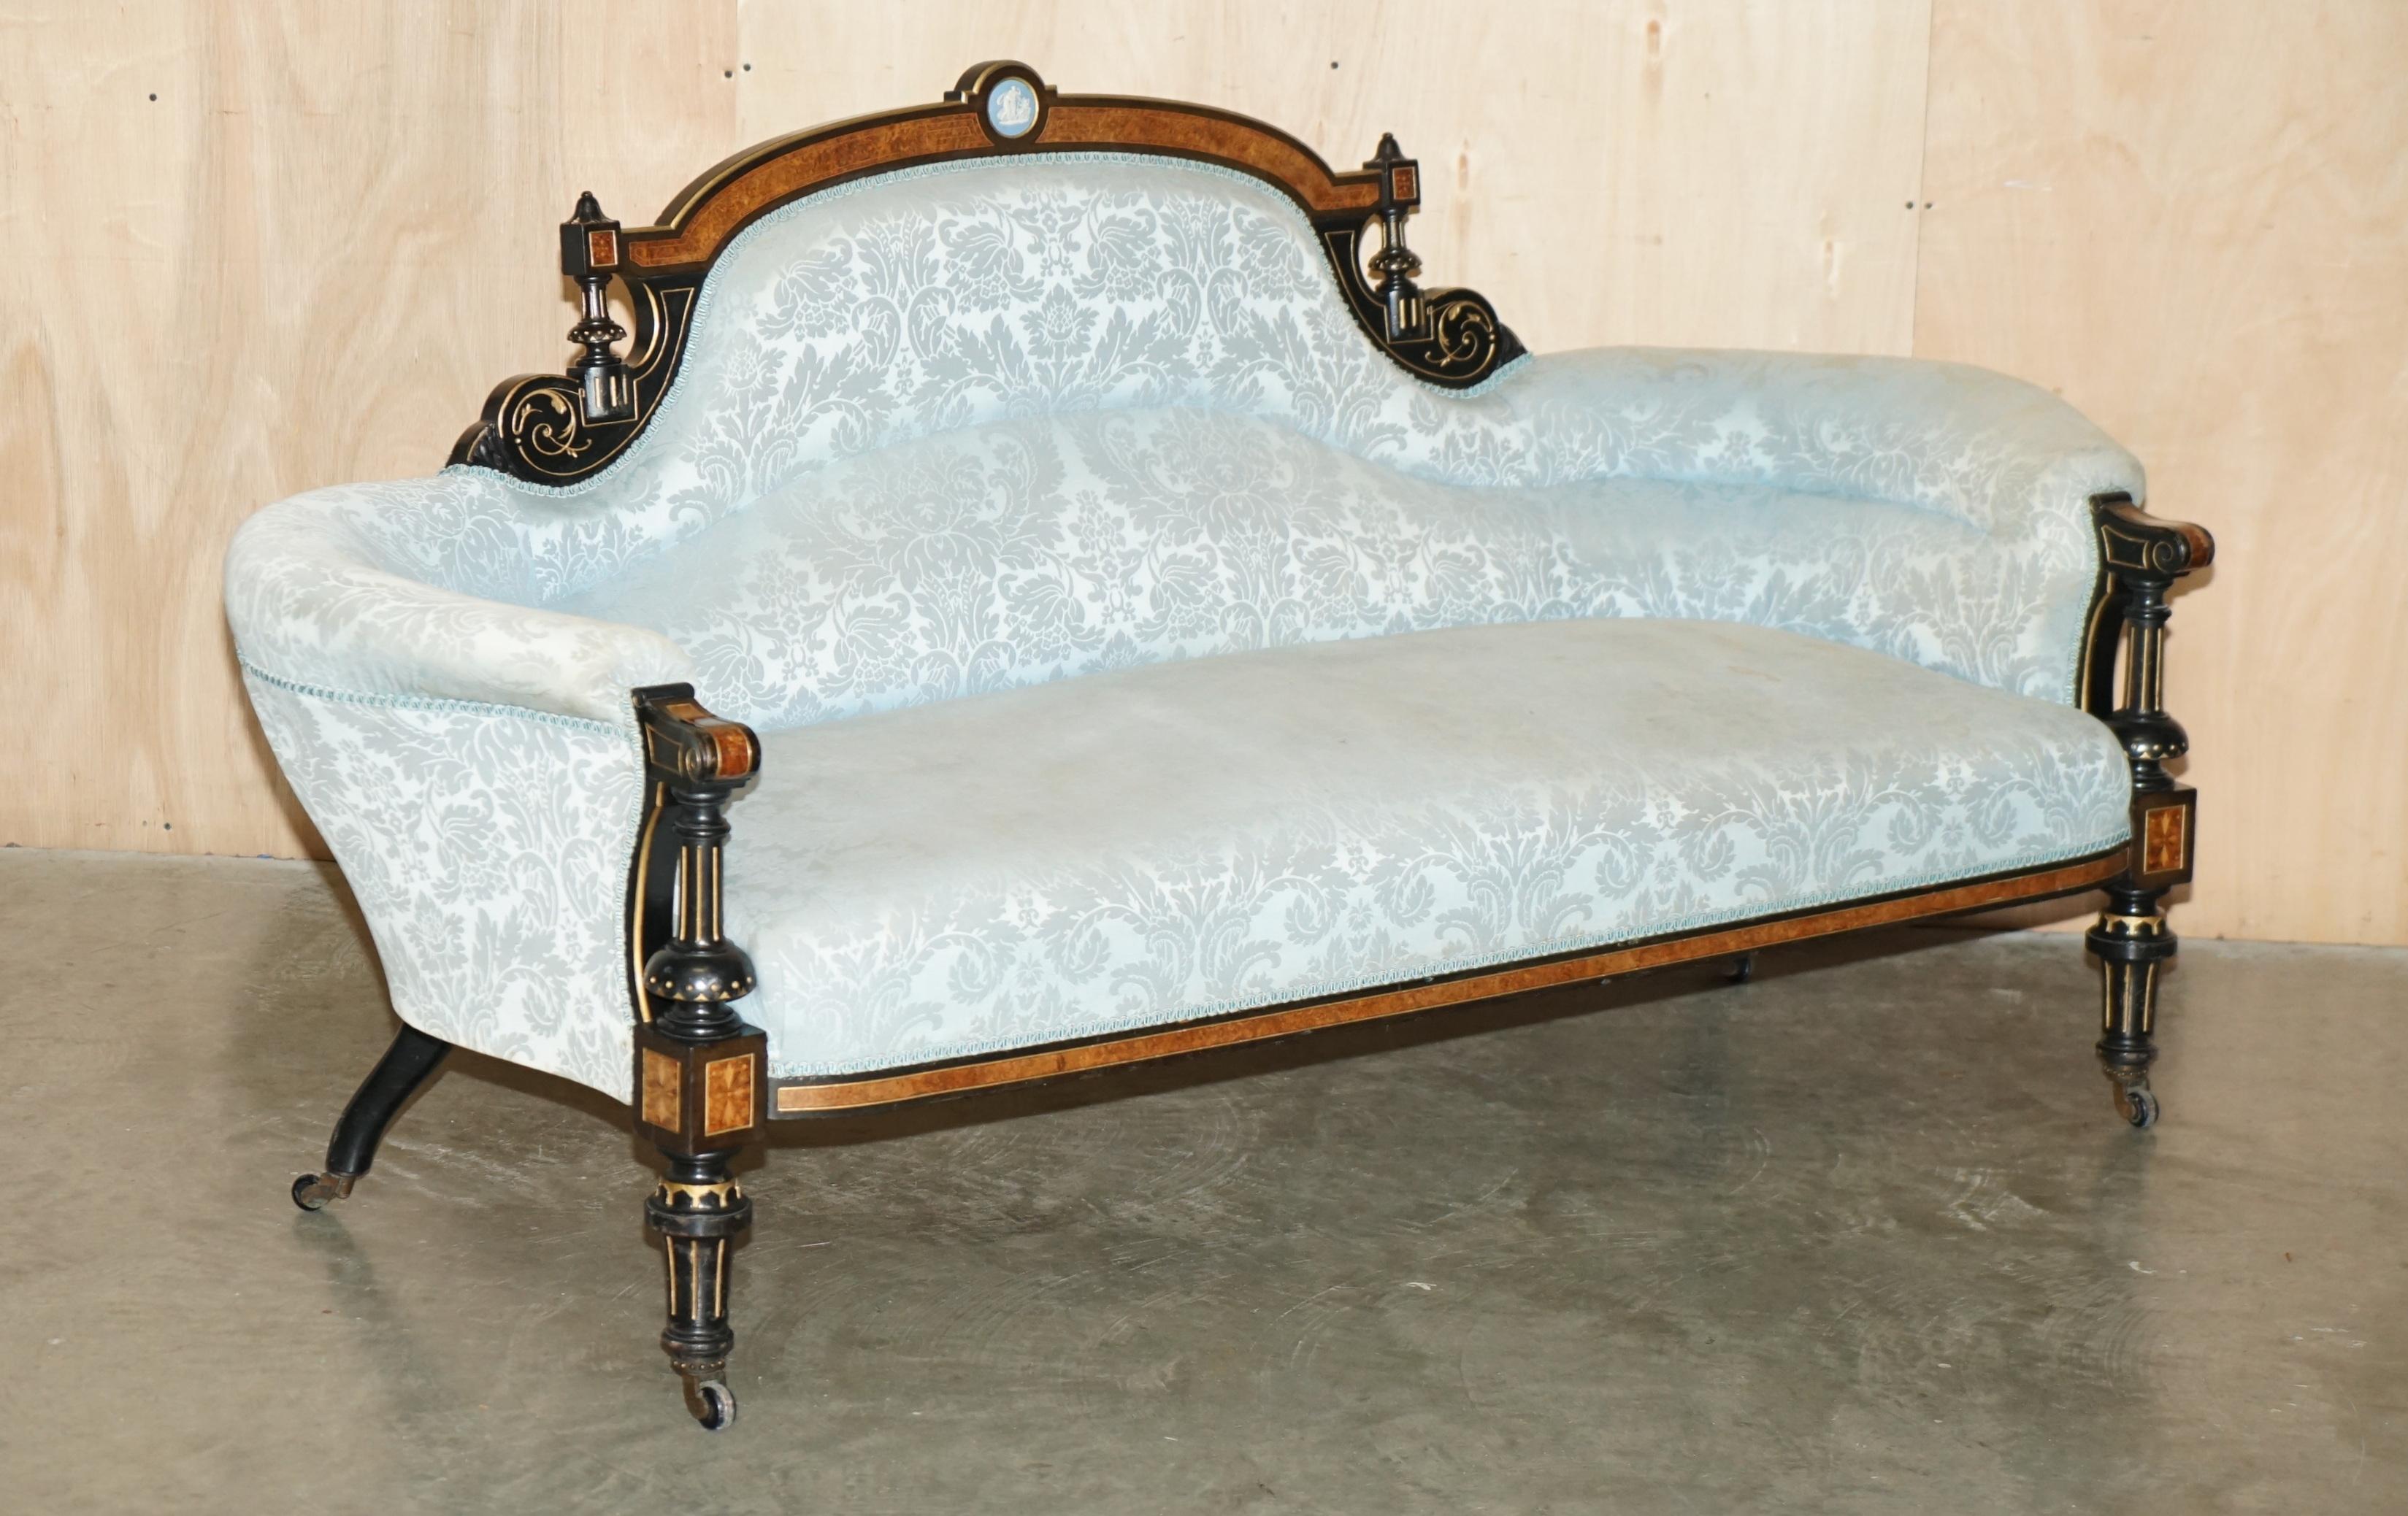 Royal House Antiques

Royal House Antiques is delighted to offer for sale very rare, highly collectable Burr Walnut & Ebony framed Victorian Aesthetic Movement Salon sofa with a inset Grand Tour plaque that is part of a suite 

Please note the